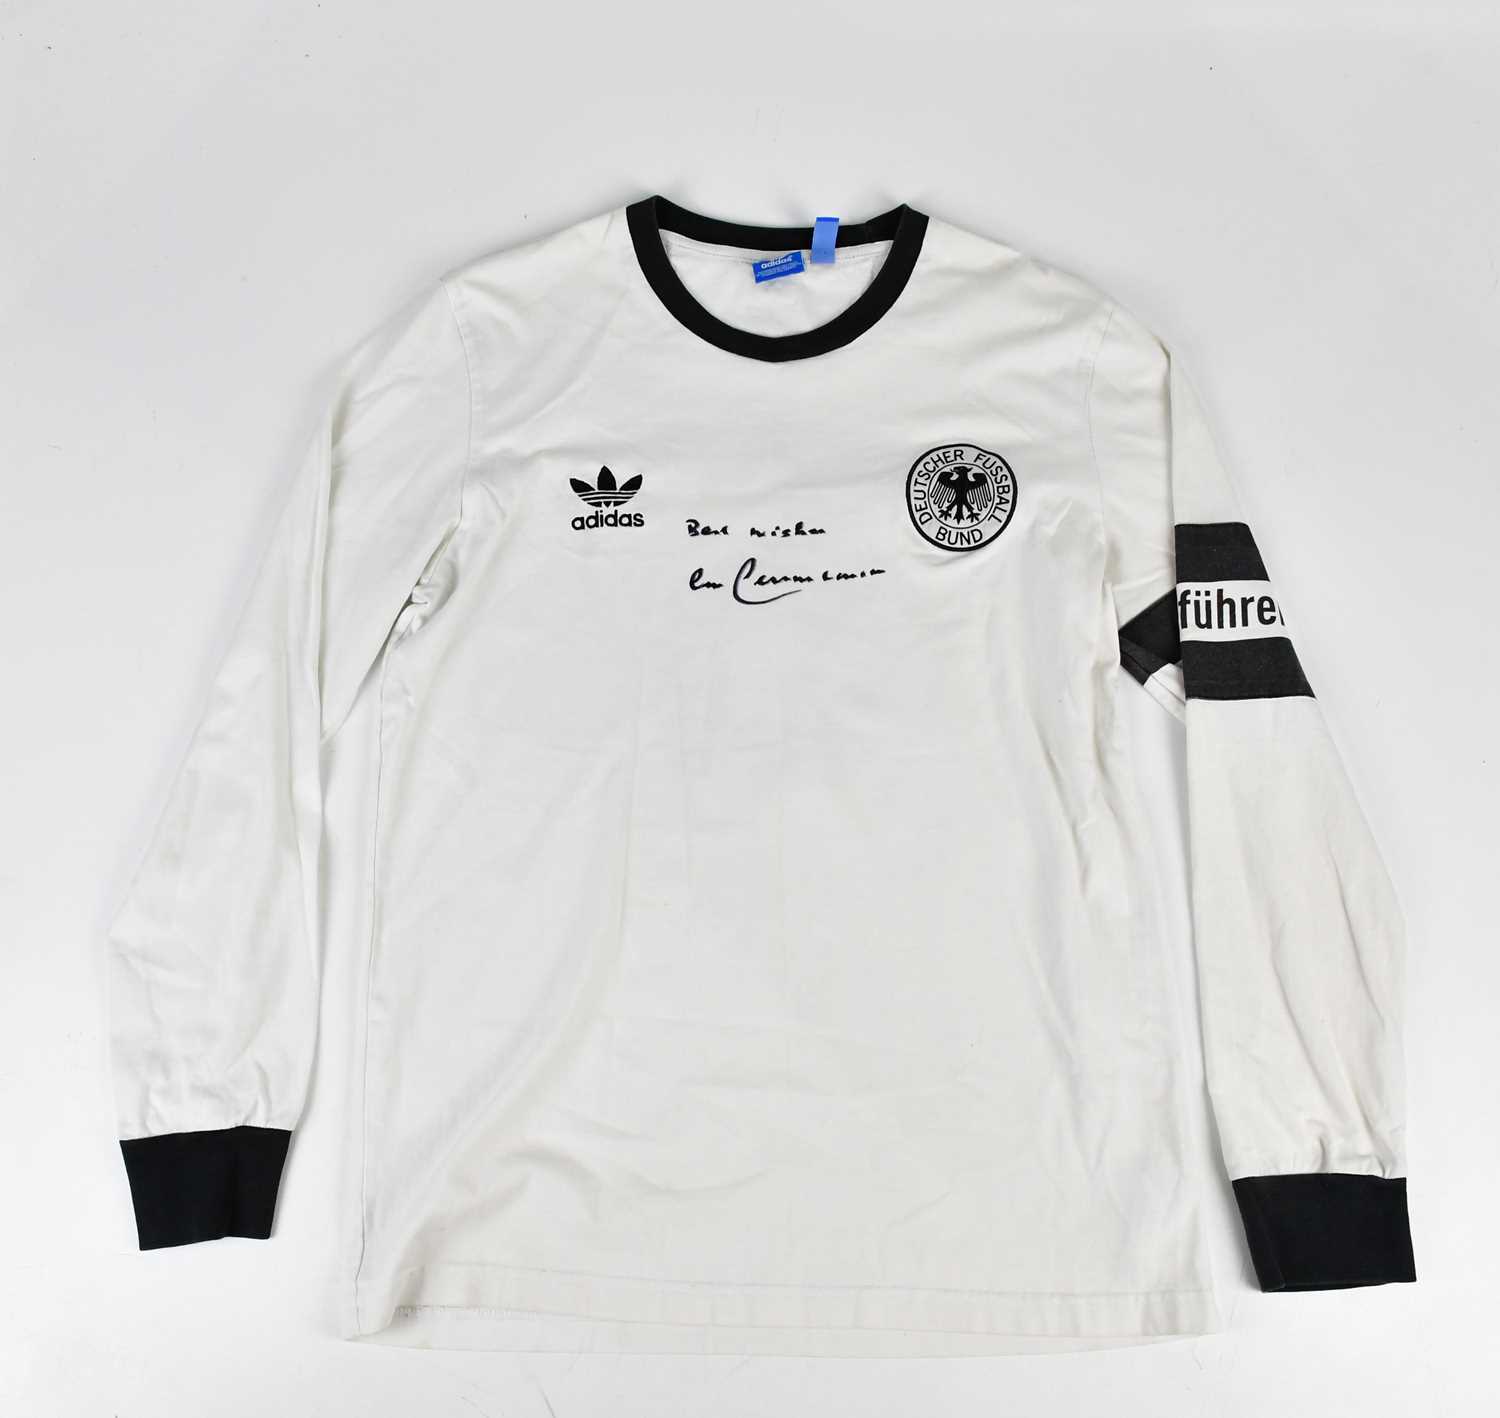 BECKENBAUER; a signed Germany retro style football shirt, signed to the front, size L. Condition